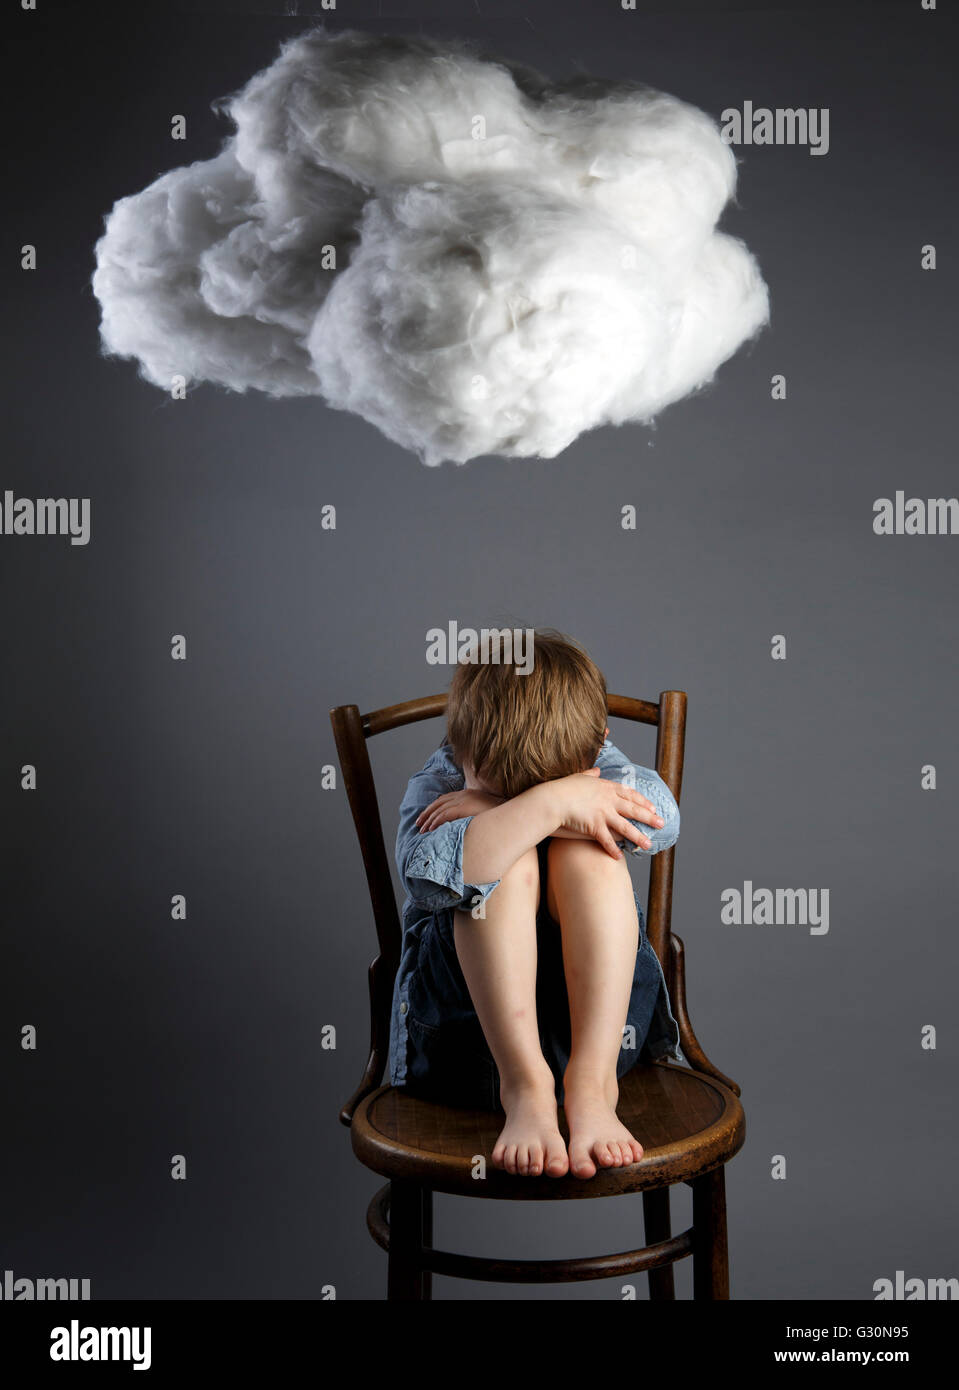 Young boy child sitting on chair with cloud above his head symbolizing sadness and depression Stock Photo